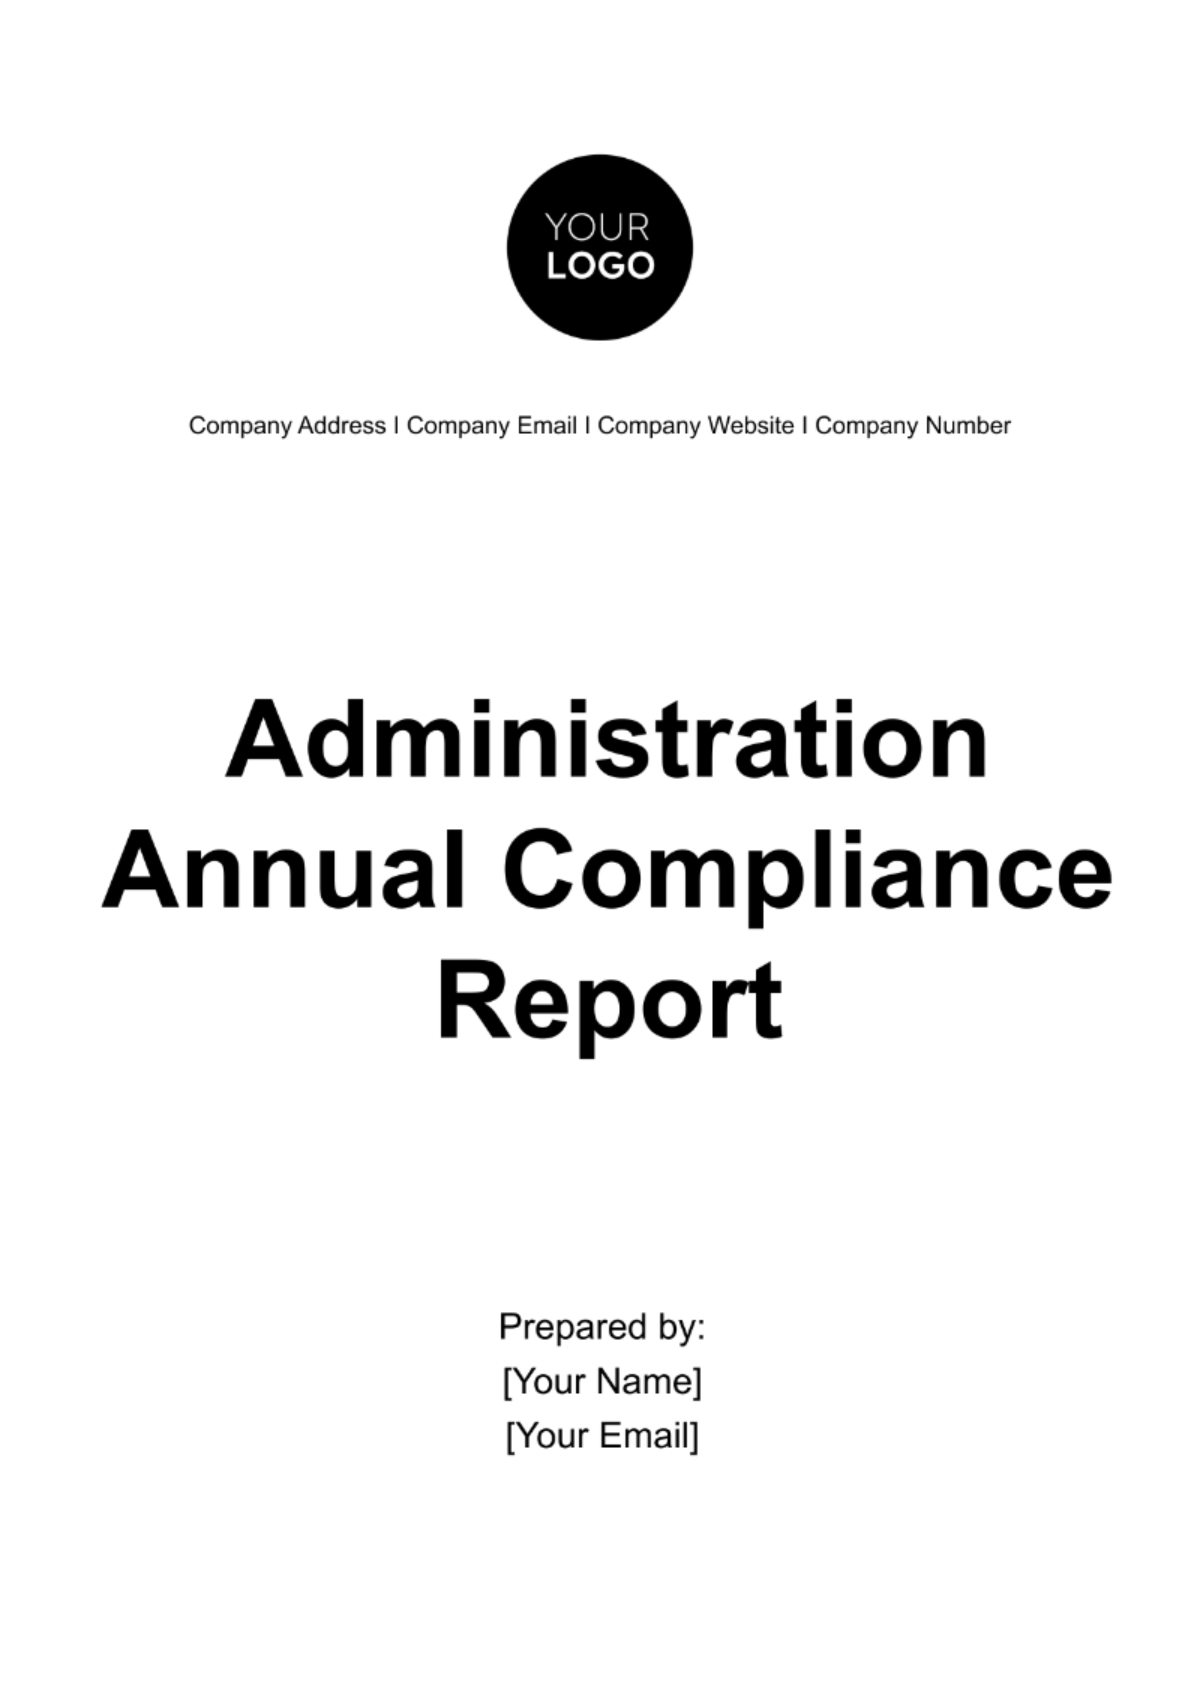 Administration Annual Compliance Report Template